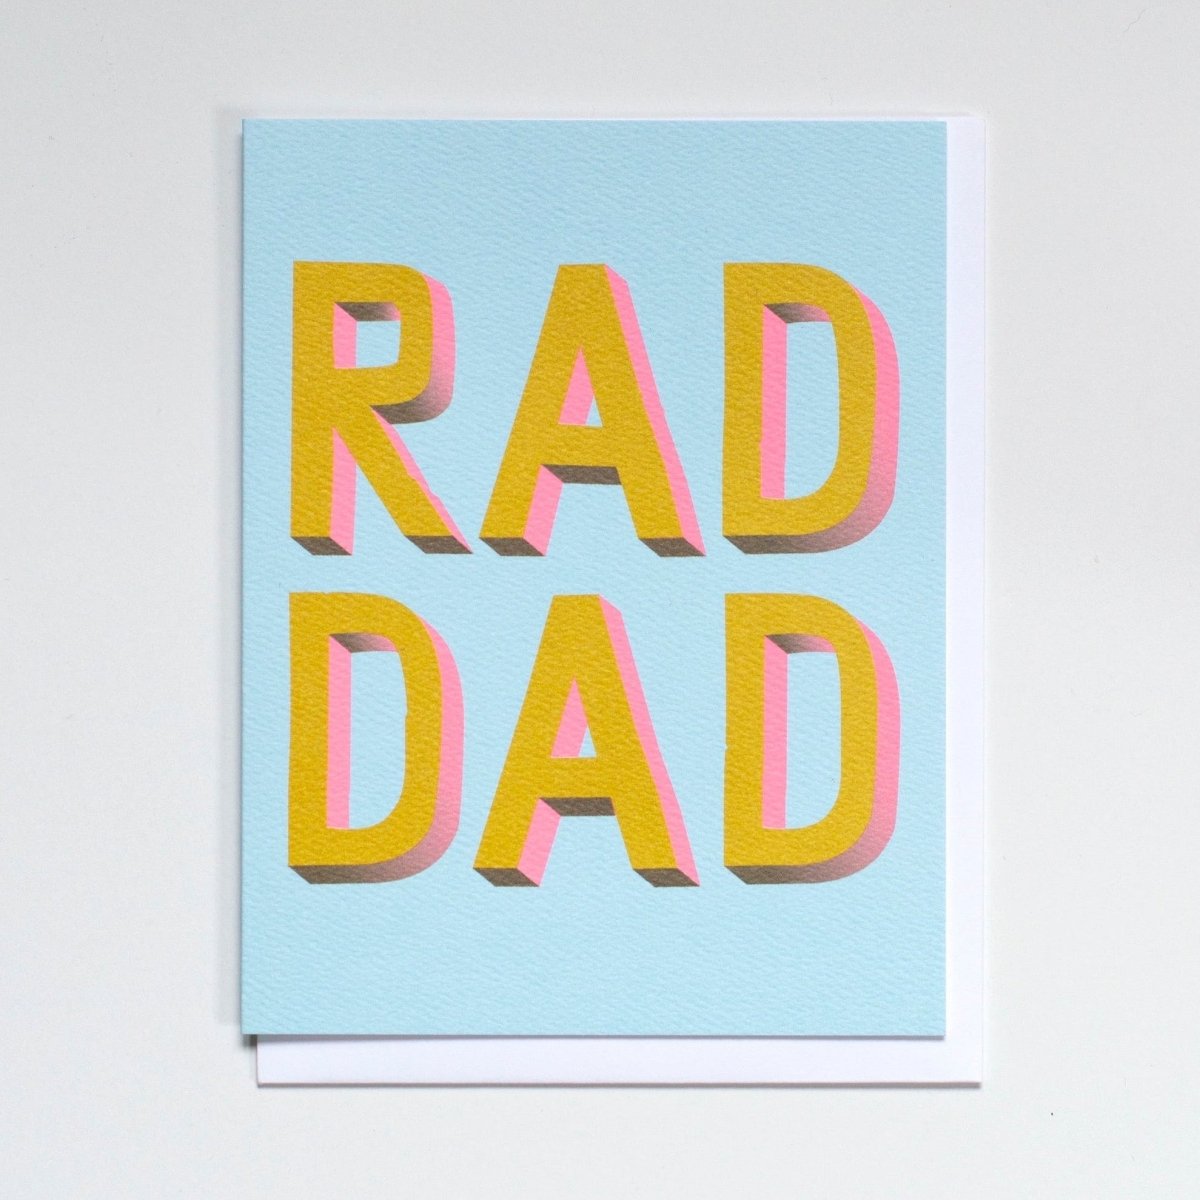 Greeting card reads "RAD DAD" in yellow and pink print against a light blue background. Printed by Banquet Atelier in Vancouver, Canada.